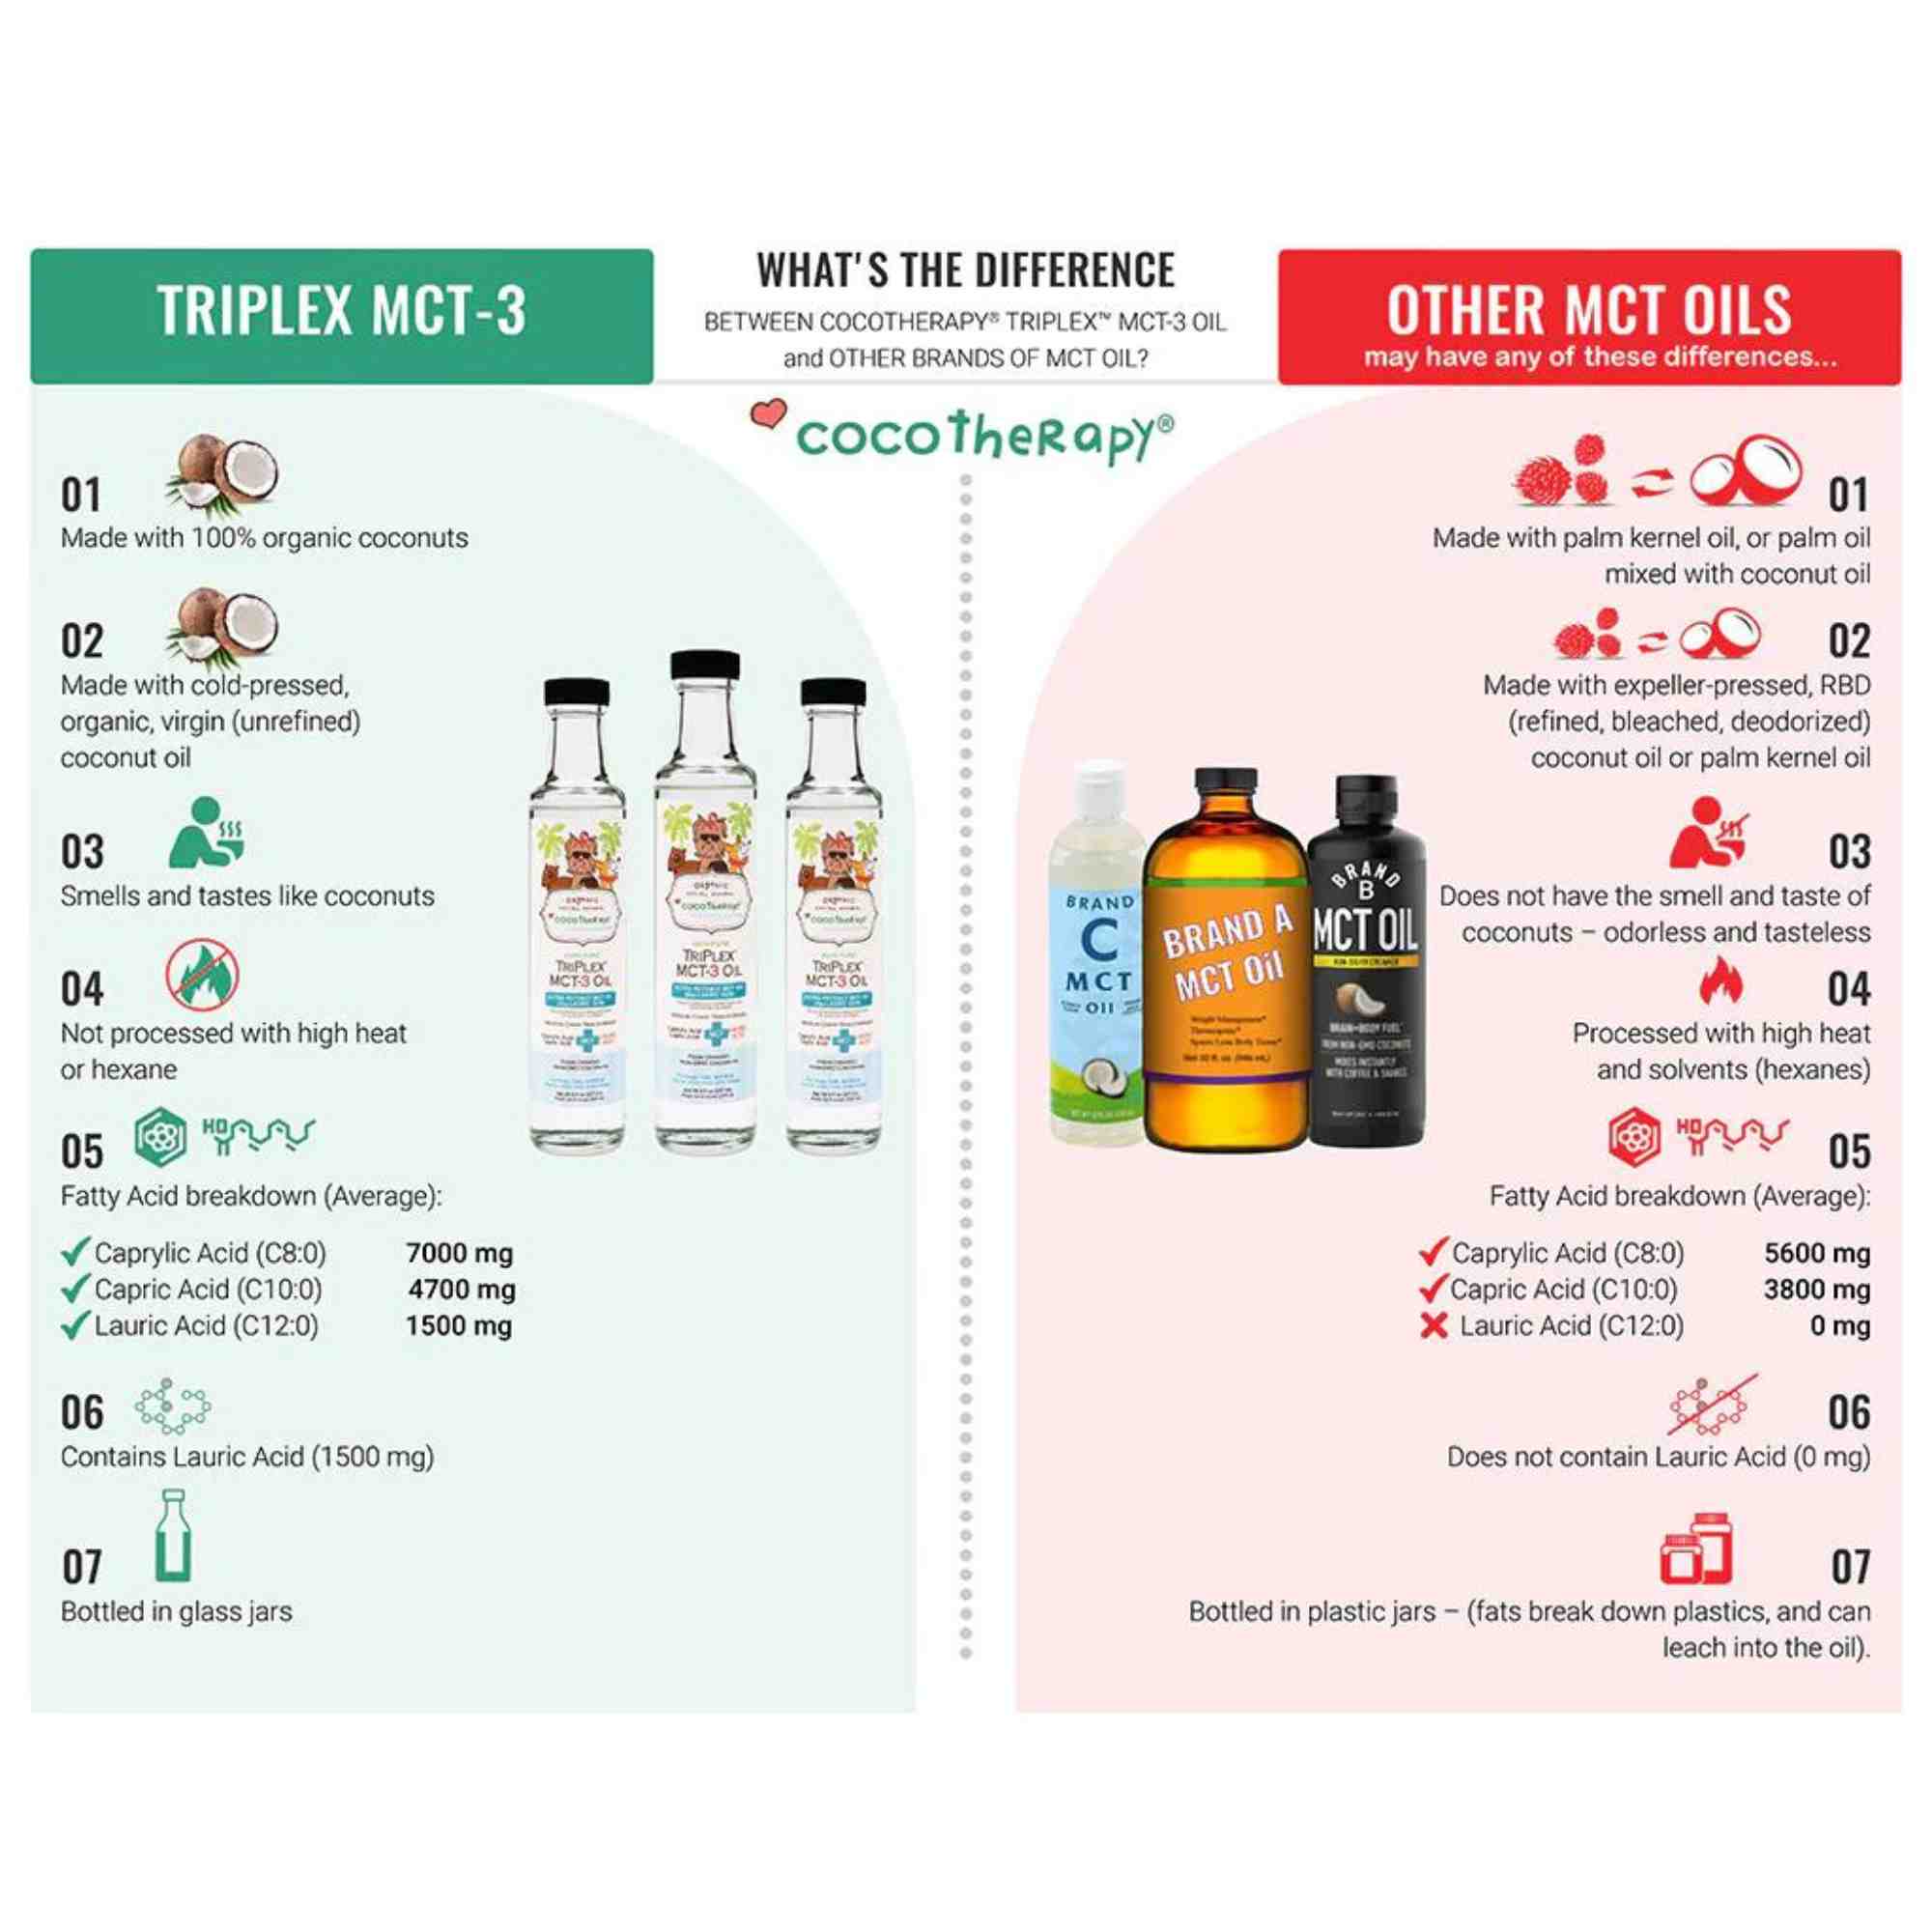 Triplex_MCT3_Oil_Difference by cocotherapy